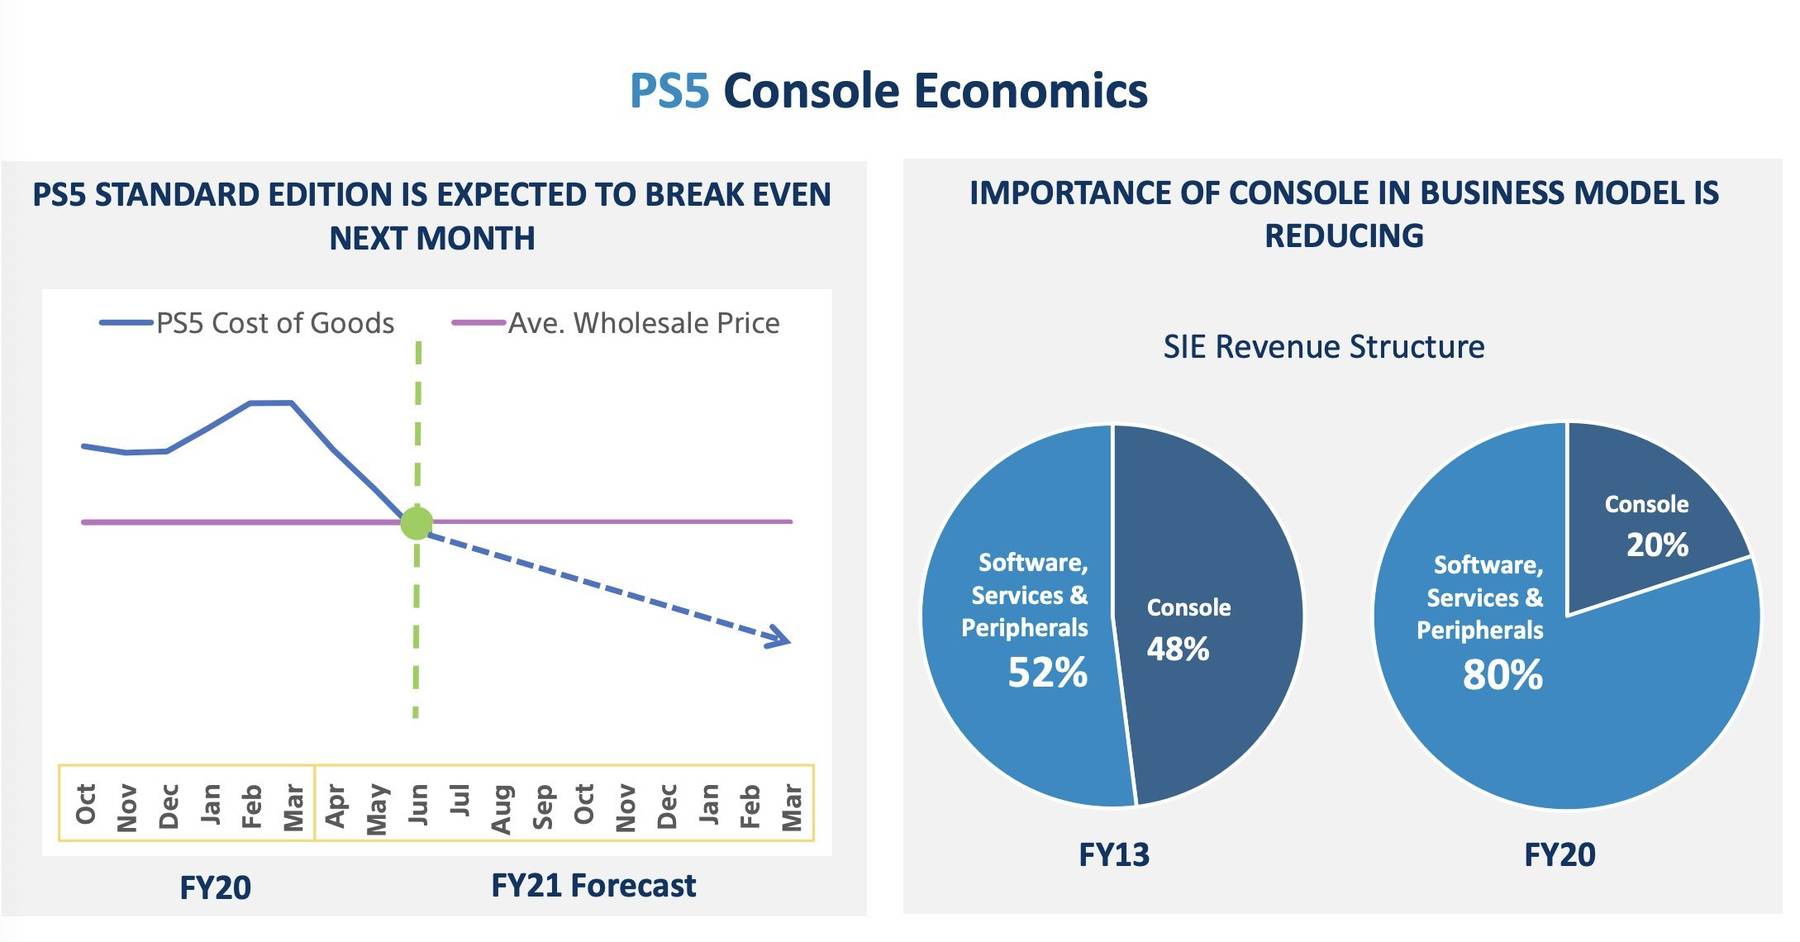 PS5 standard edition will become profitable